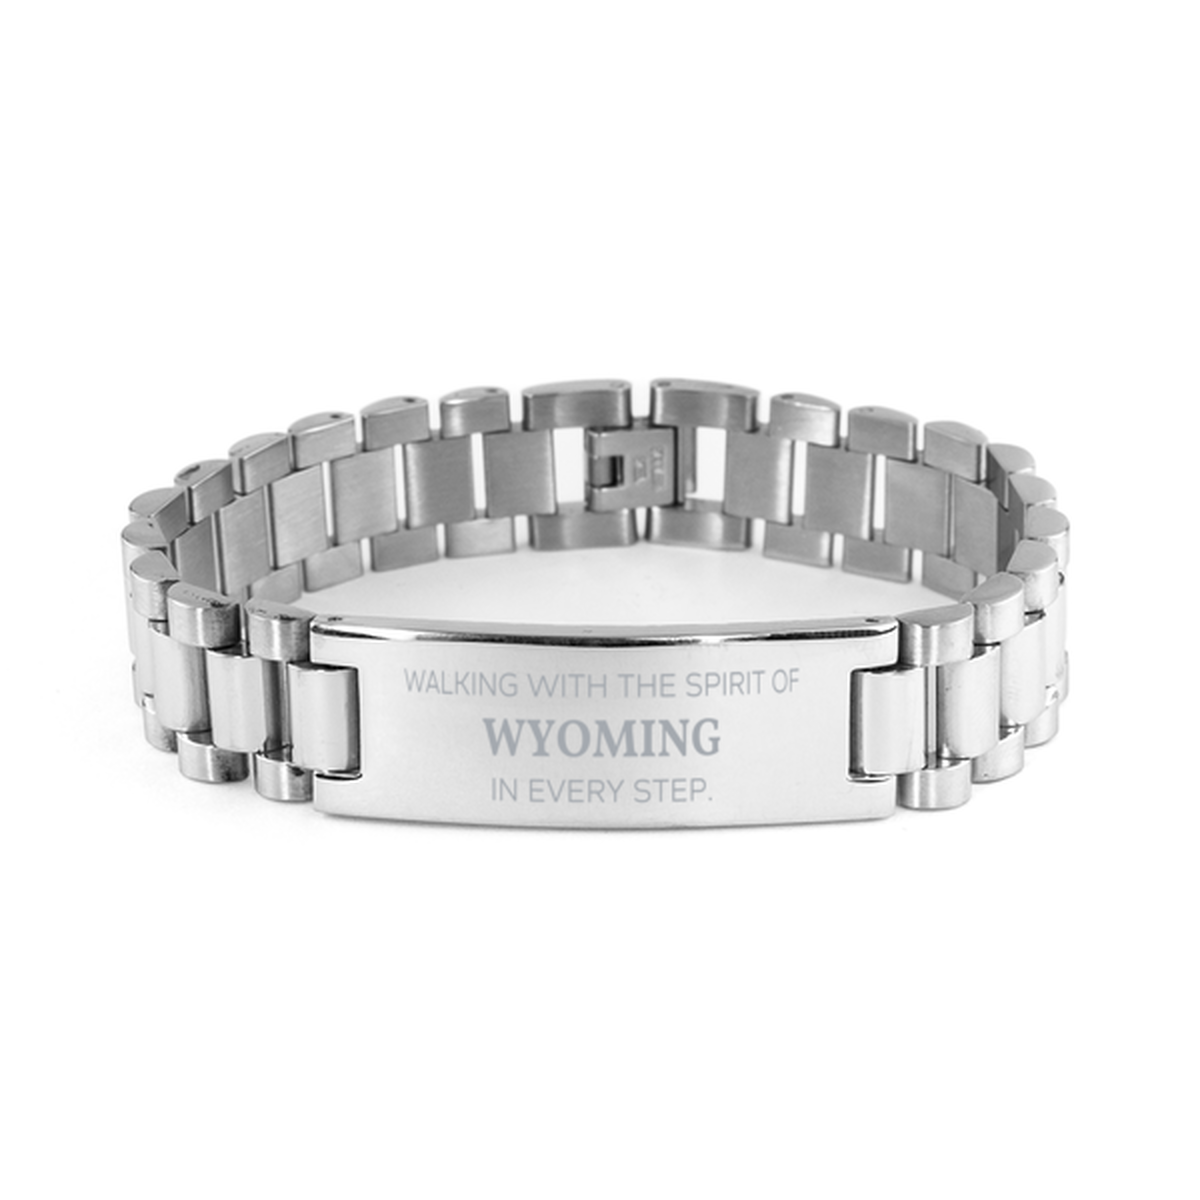 Wyoming Gifts, Walking with the spirit, Love Wyoming Birthday Christmas Ladder Stainless Steel Bracelet For Wyoming People, Men, Women, Friends